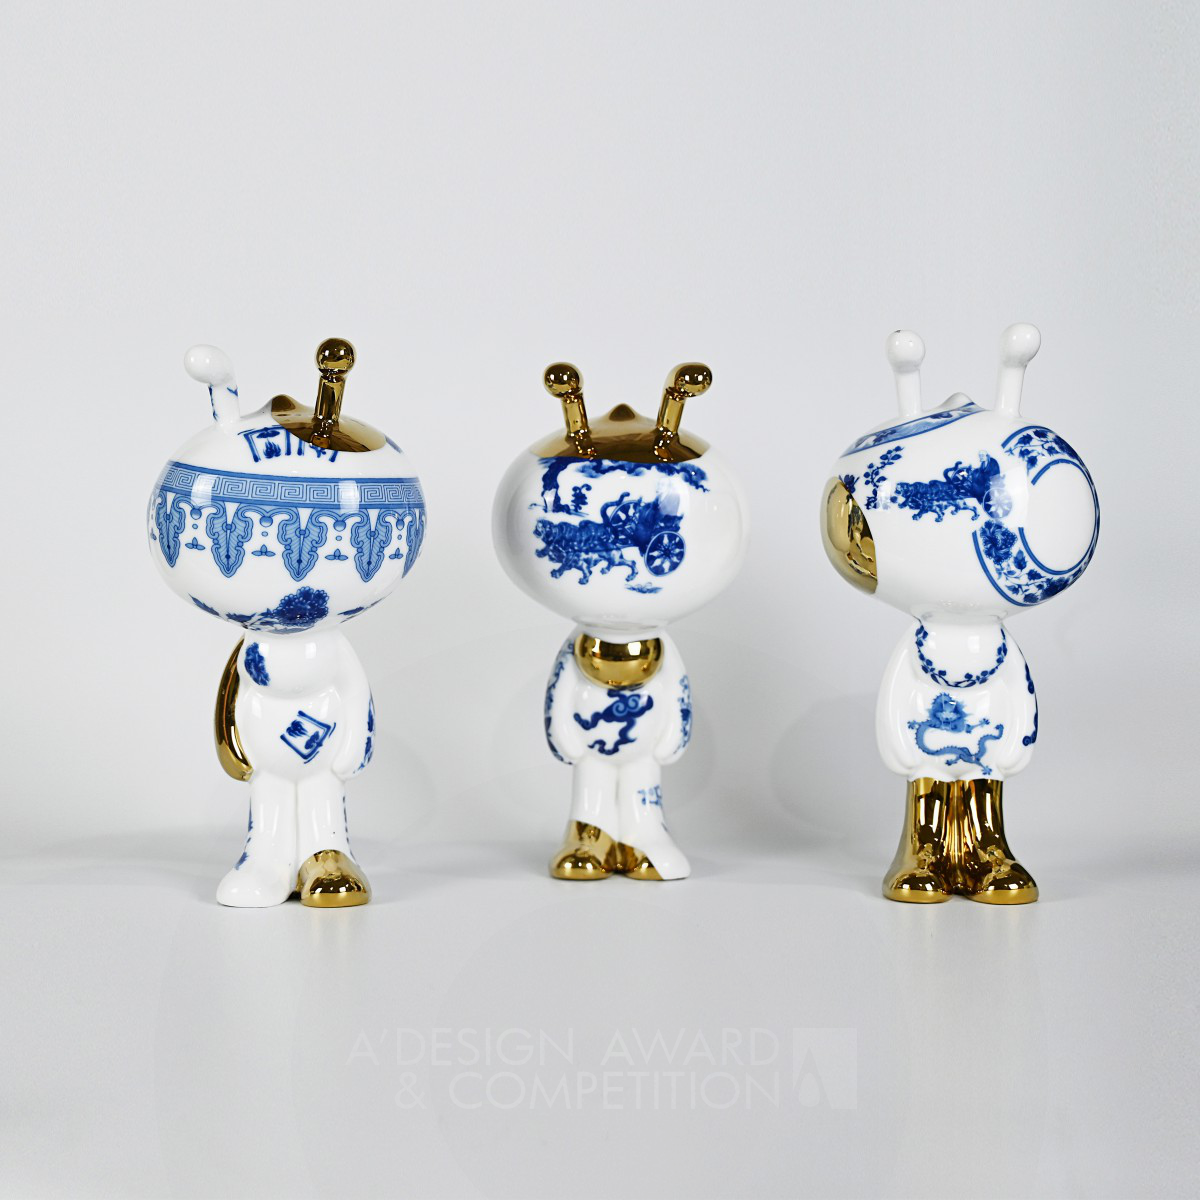 East and West Ceramic Crafts by Chao Yang